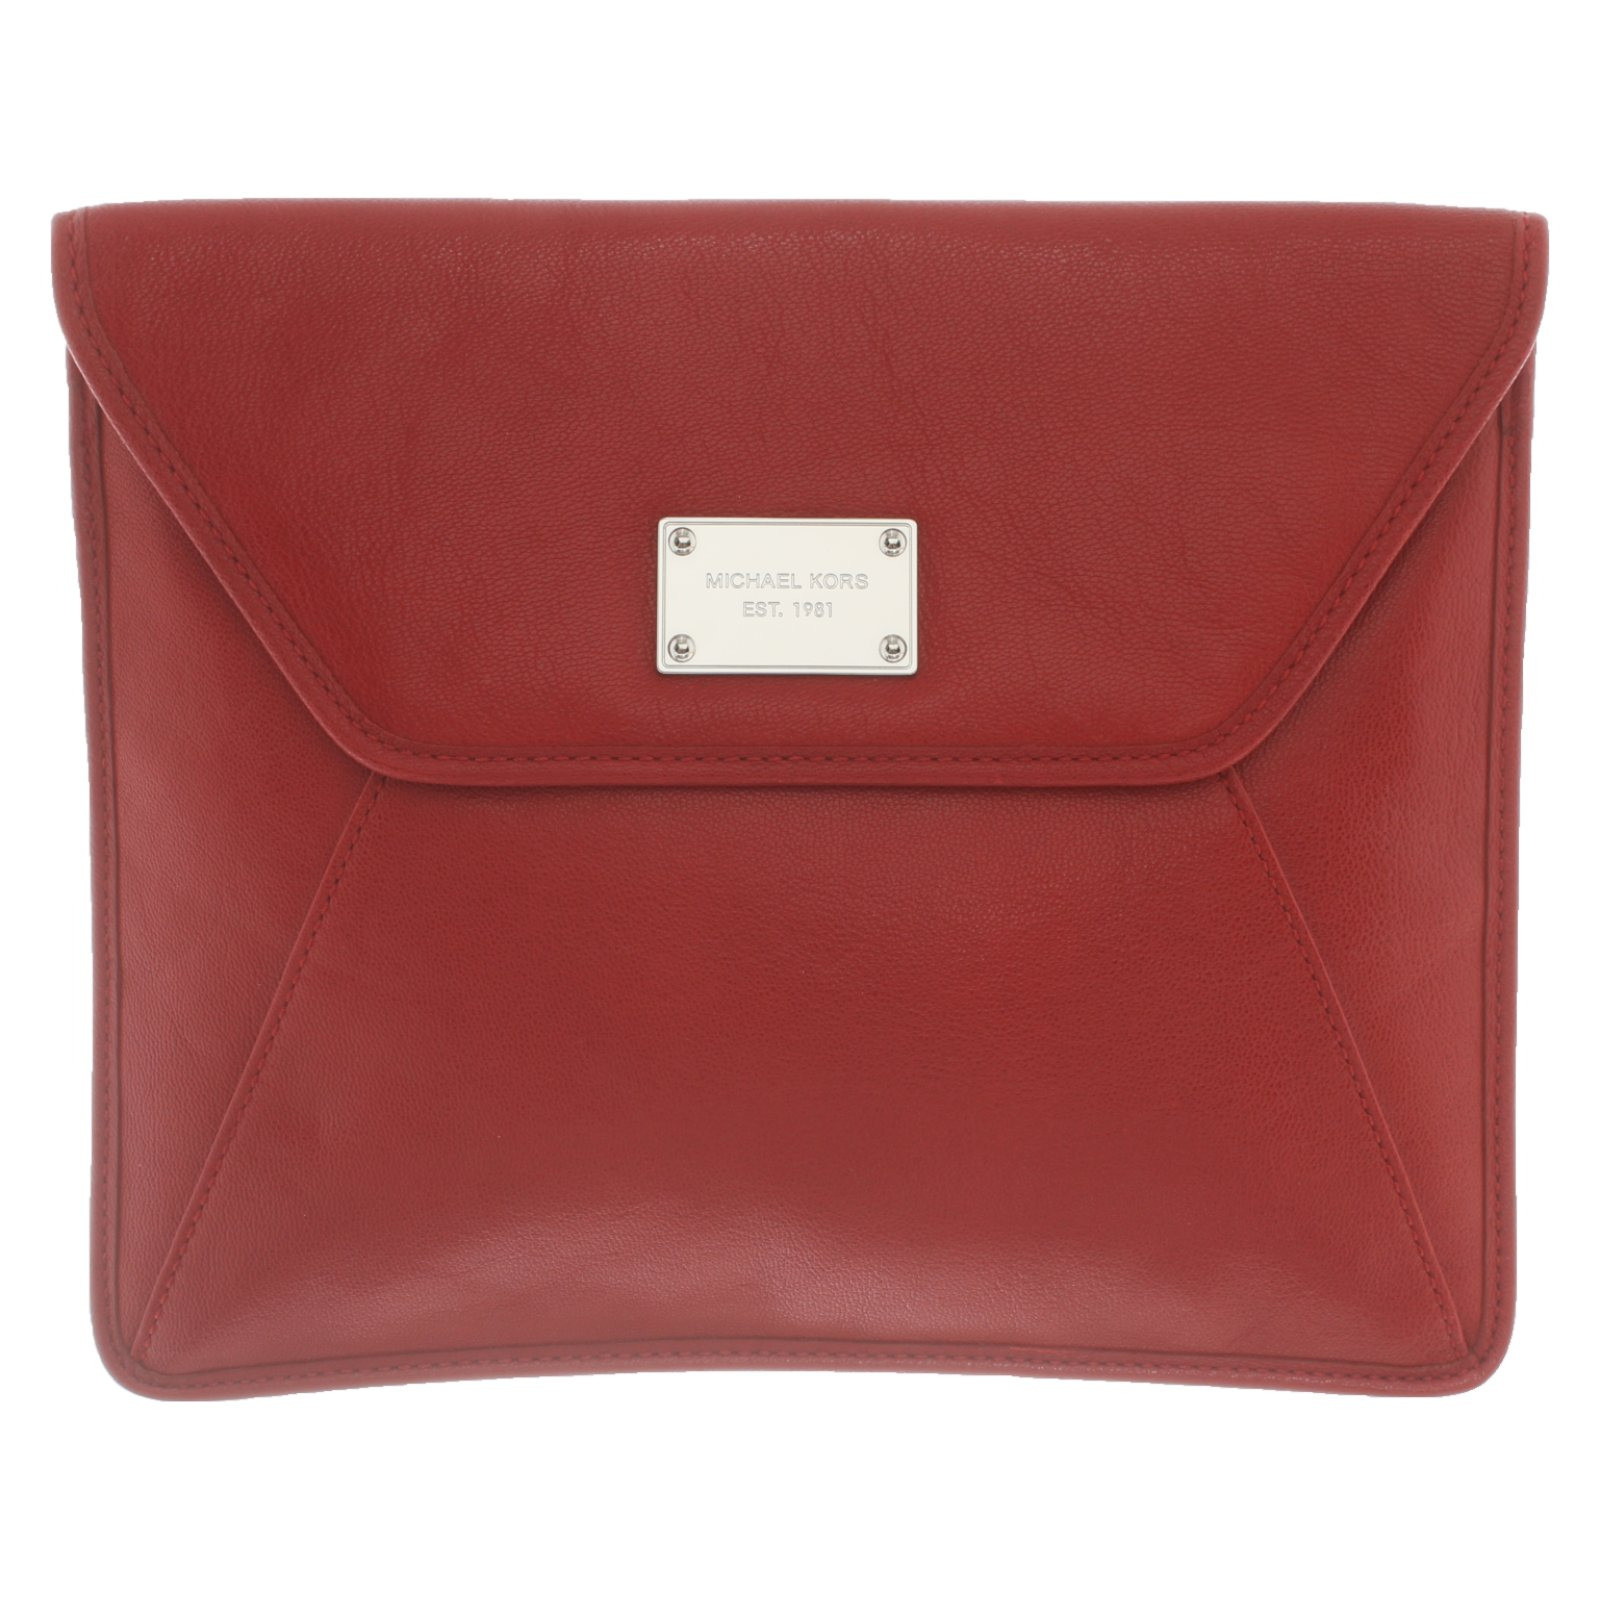 Michael Kors Clutch Bag Leather in Red - Second Hand Michael Kors Clutch  Bag Leather in Red buy used for 69€ (4673045)